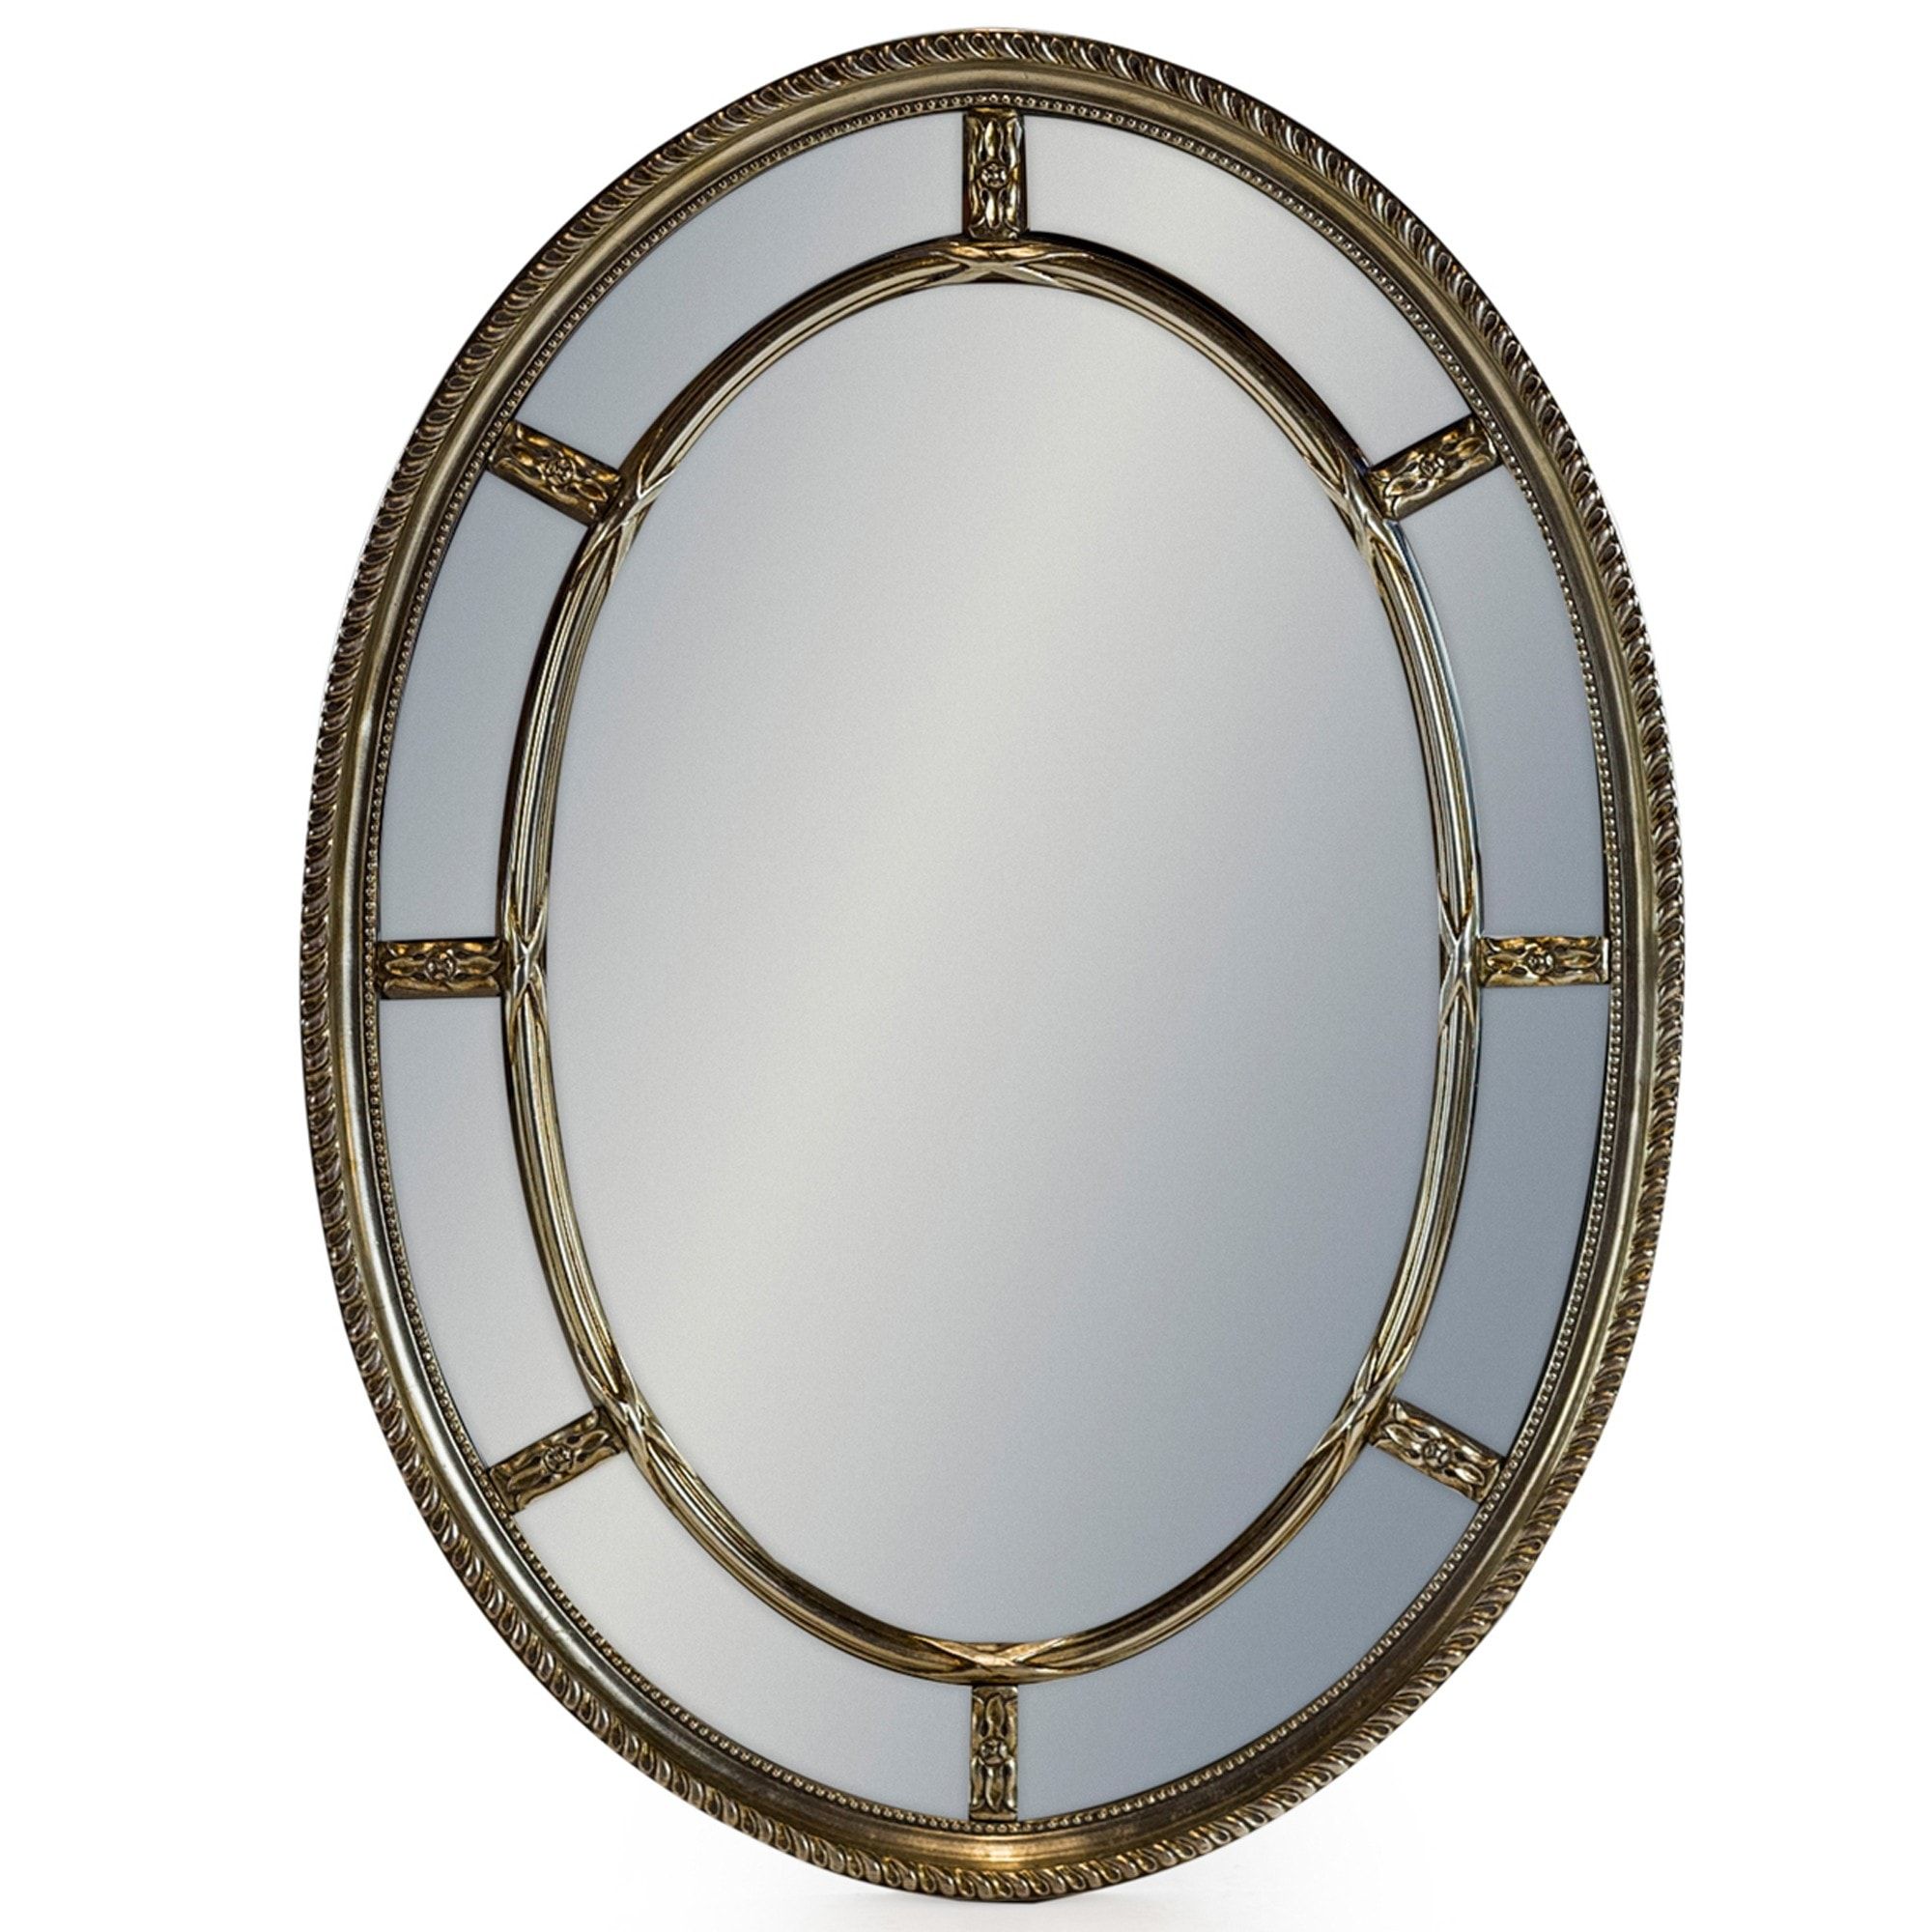 Silver Antique French Style Oval Multi Mirror | Decorative Silver Intended For Antiqued Silver Quatrefoil Wall Mirrors (View 2 of 15)